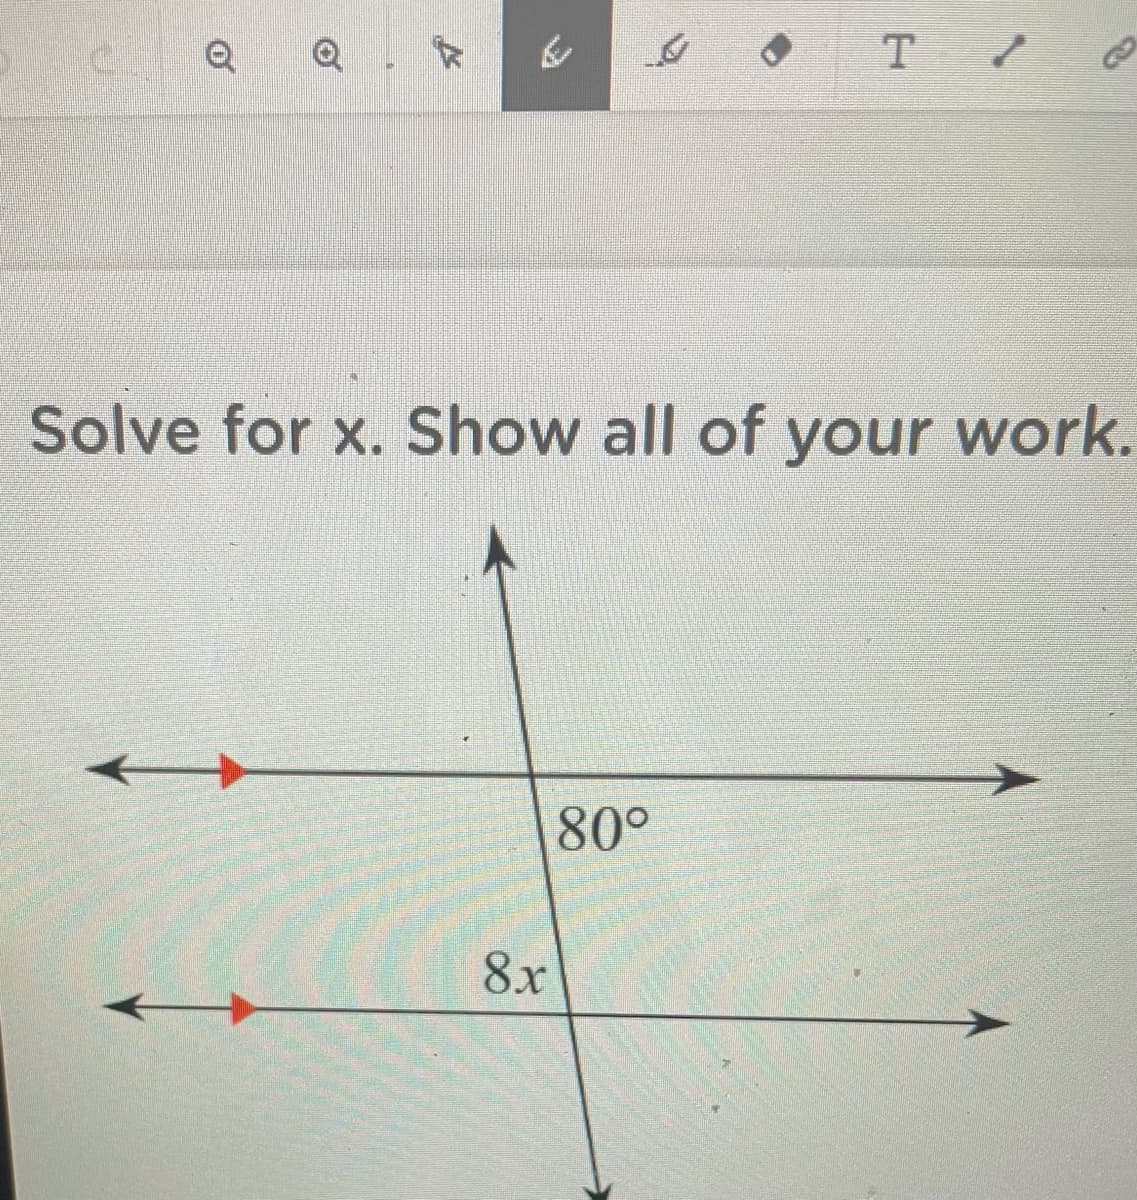 T /
Solve for x. Show all of your work.
80°
8x
